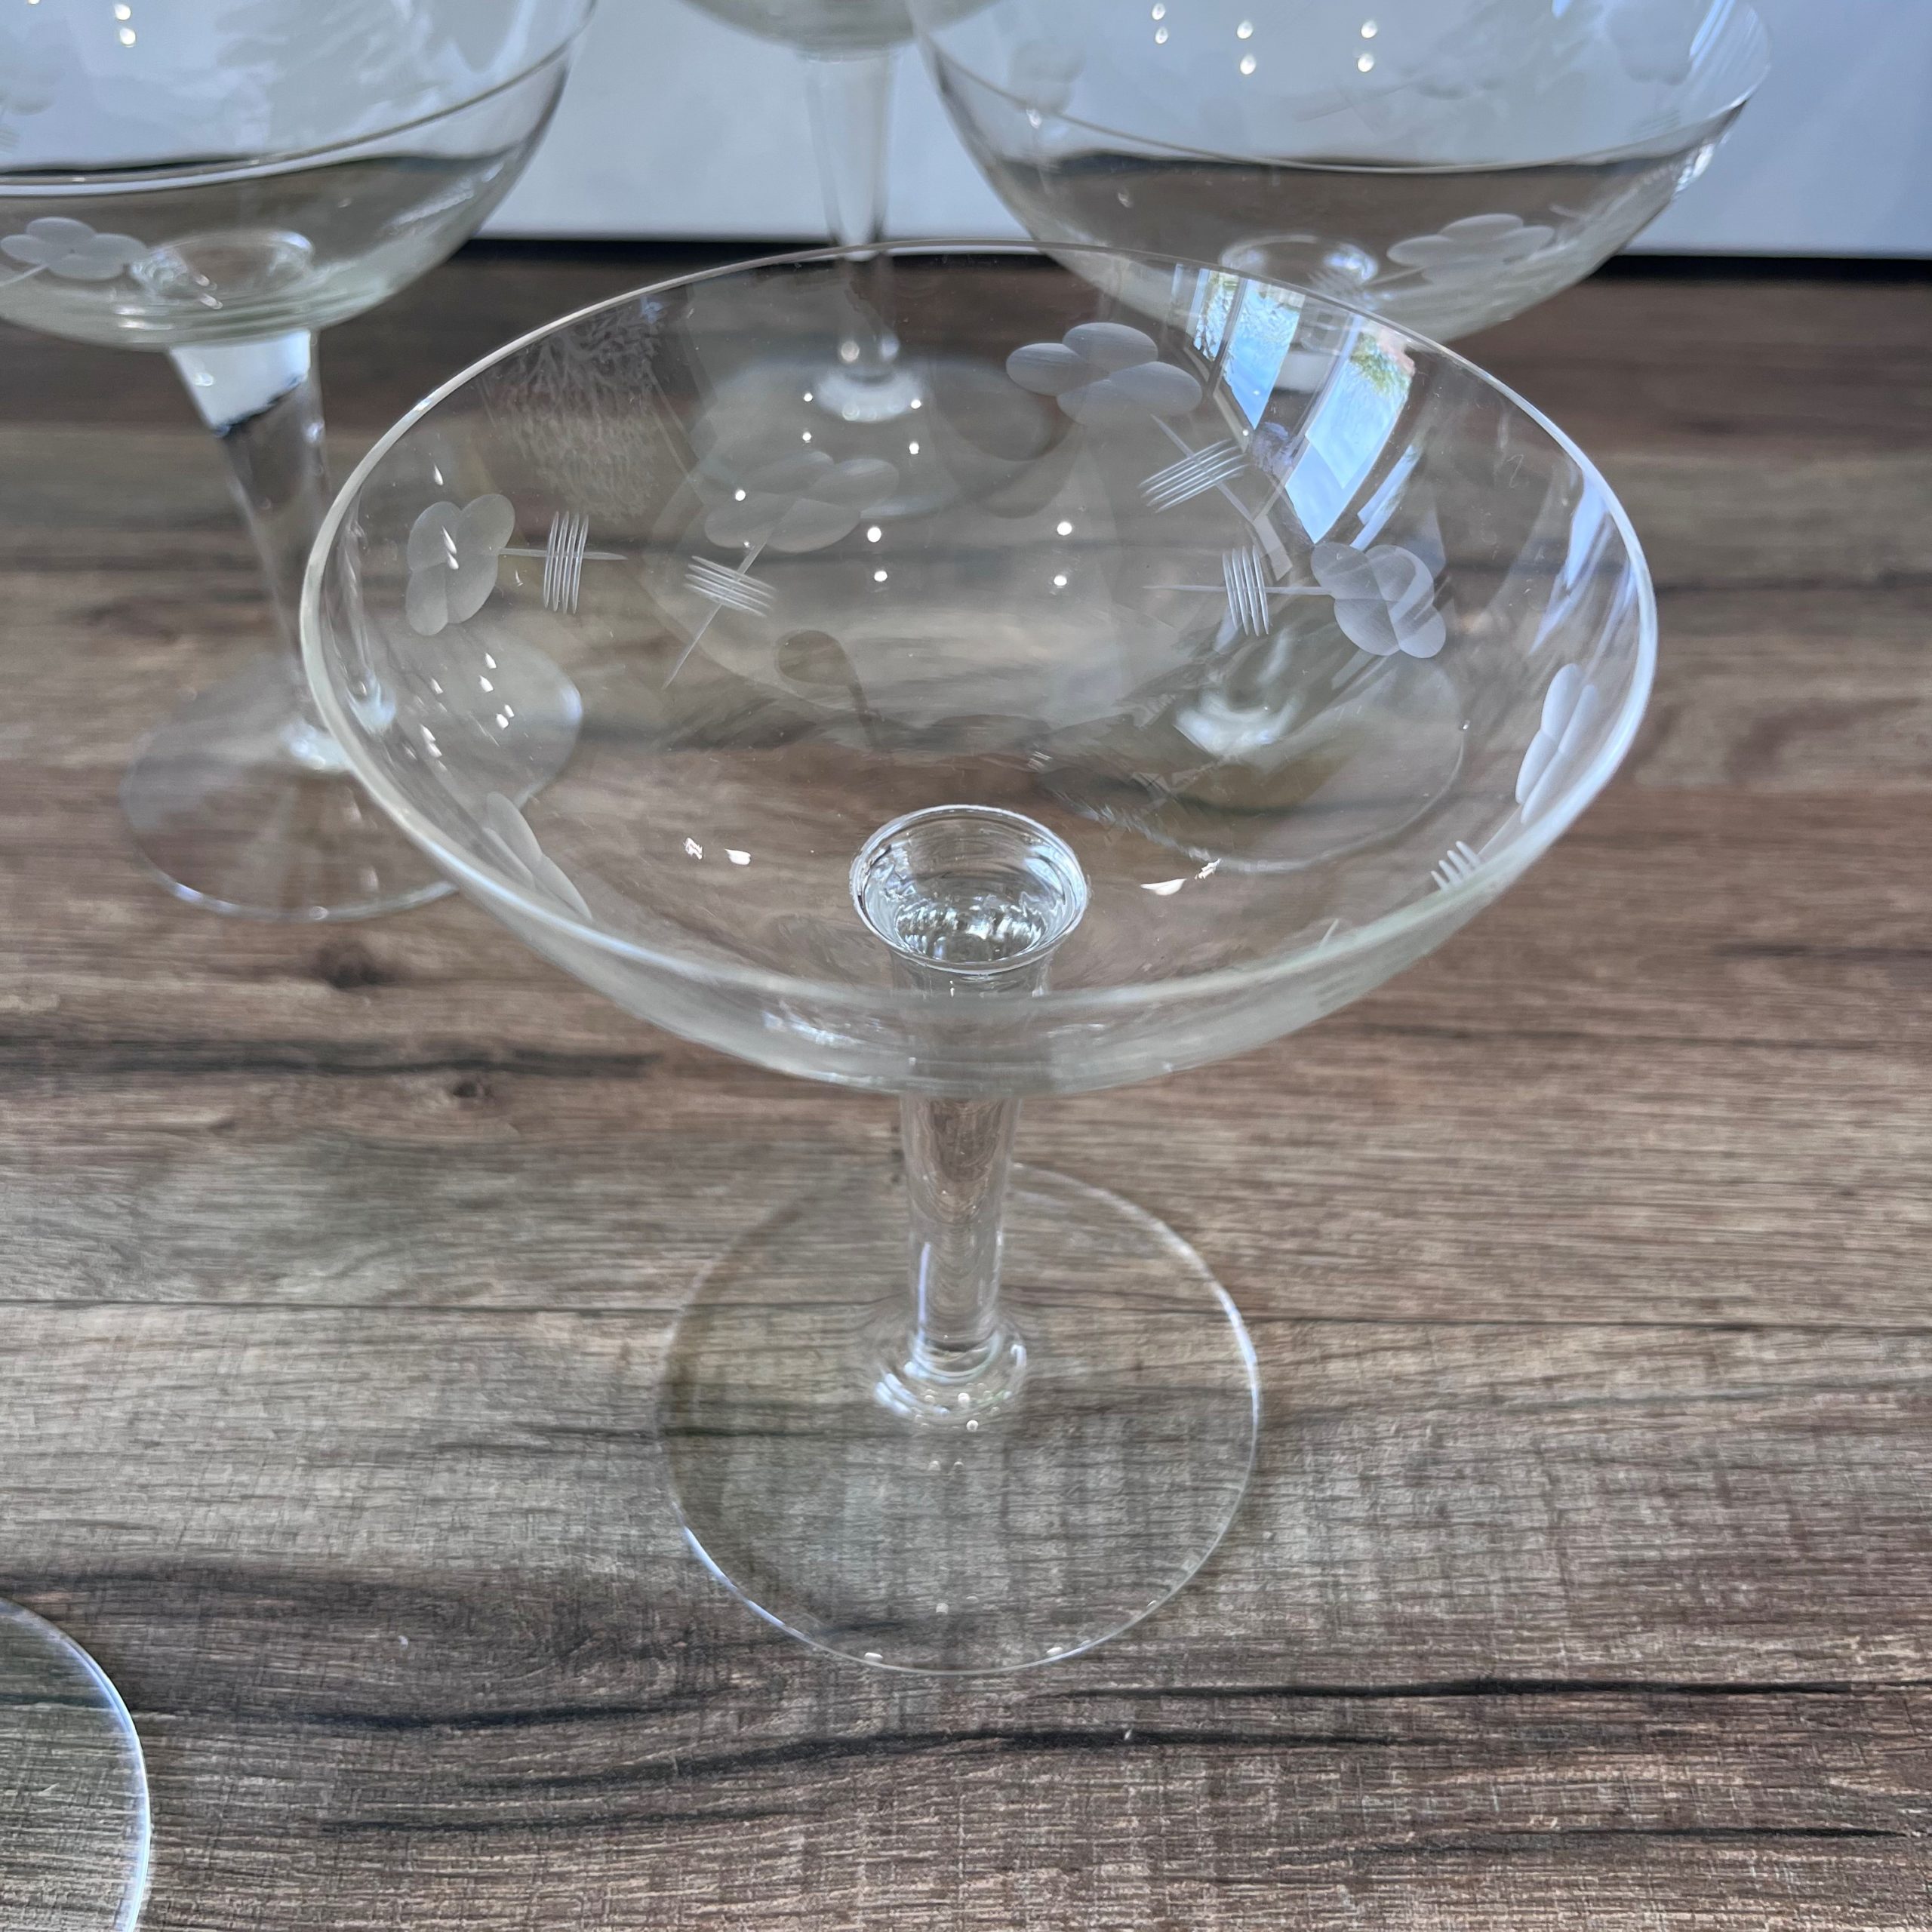 https://labrocantedeclemence.com/wp-content/uploads/2022/05/7-coupes-champagne-cristal-brocante-vintage-clemence-4-scaled.jpg